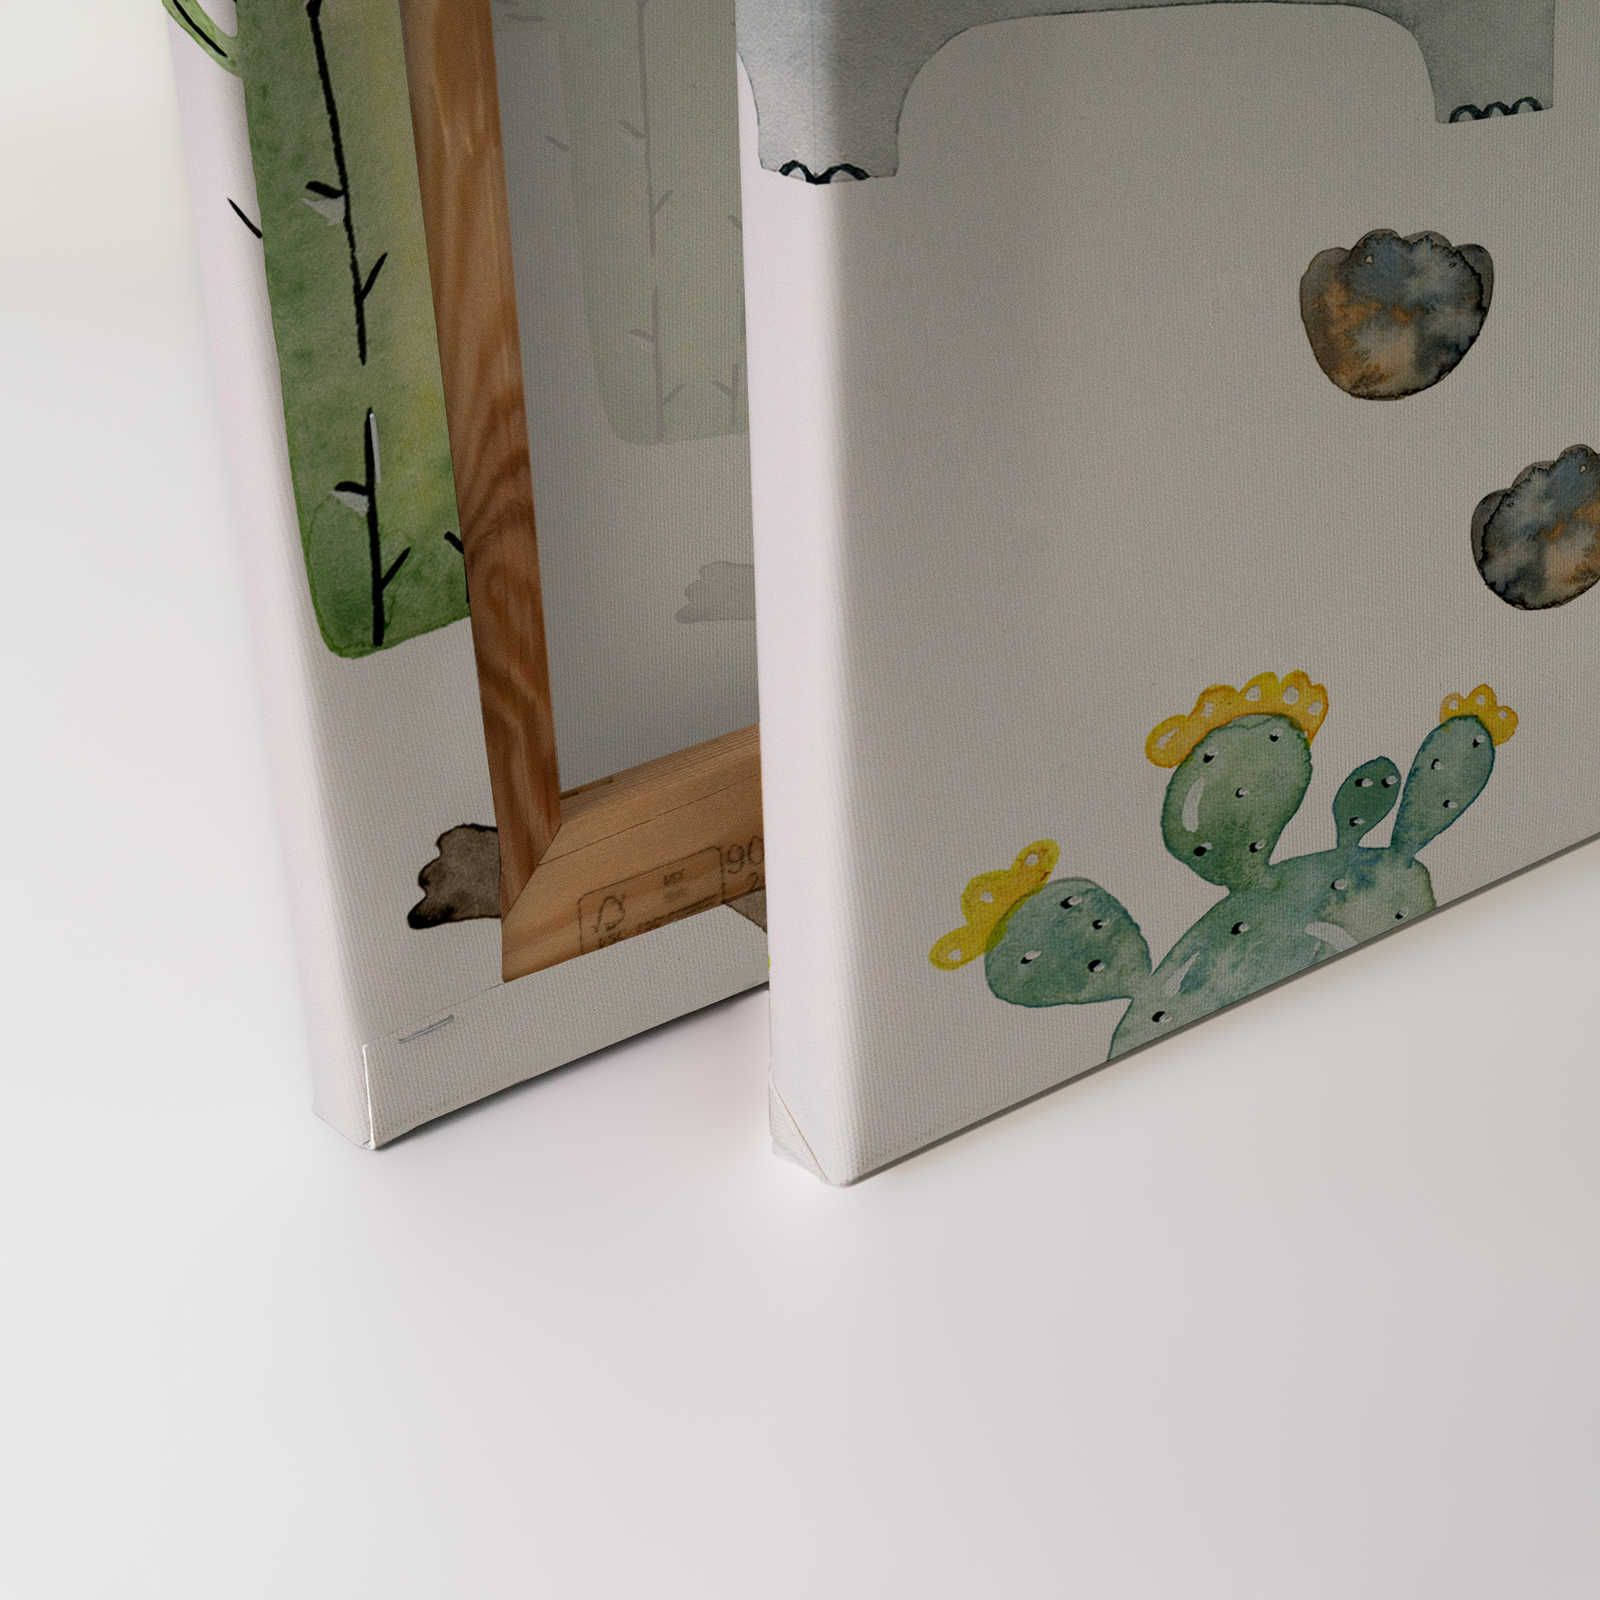             Canvas with animals and cacti - 120 cm x 80 cm
        